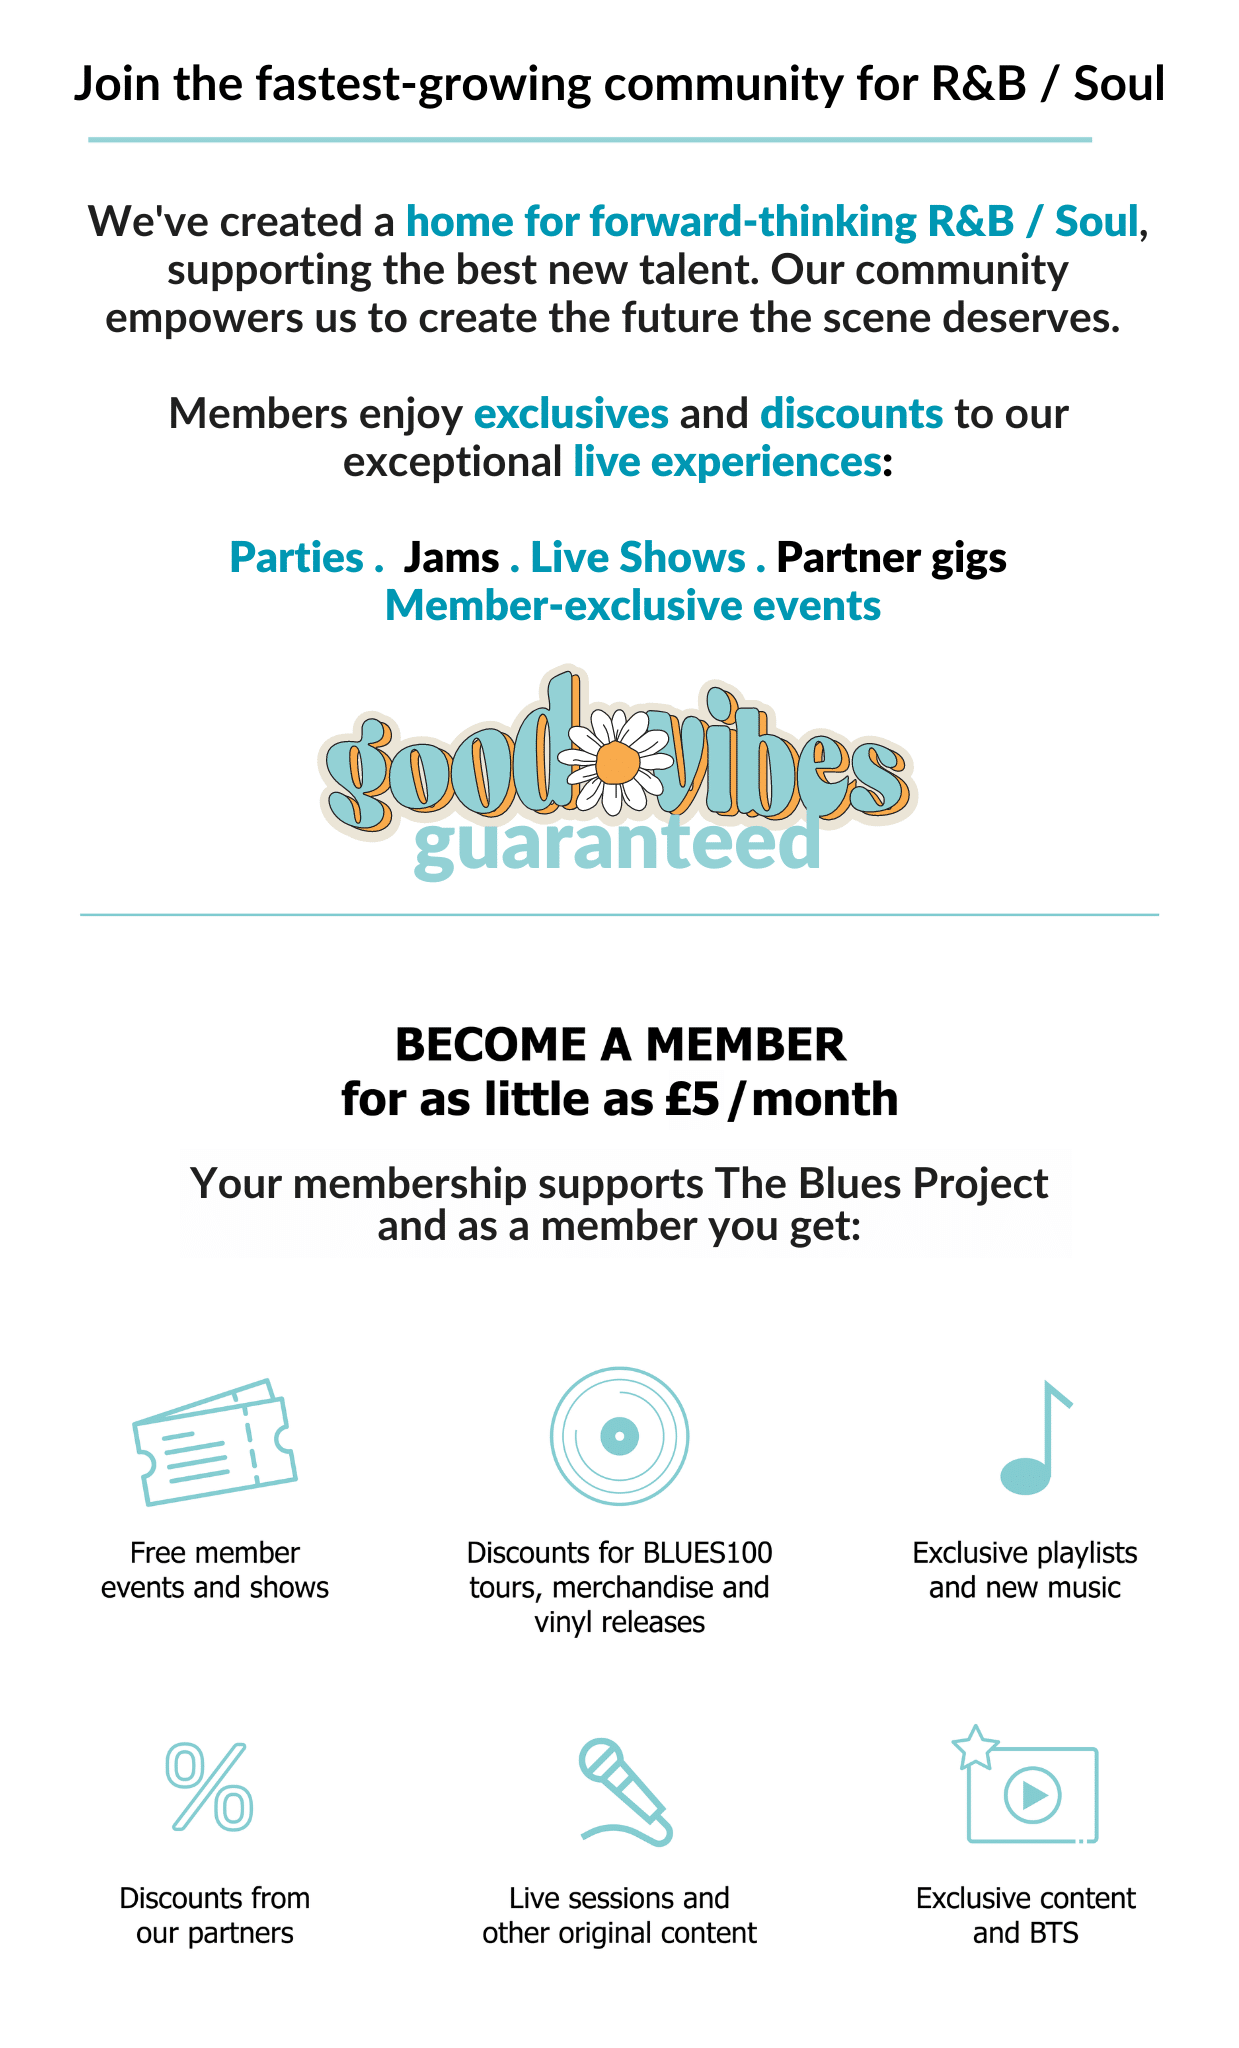 Become a member of The Blues Project